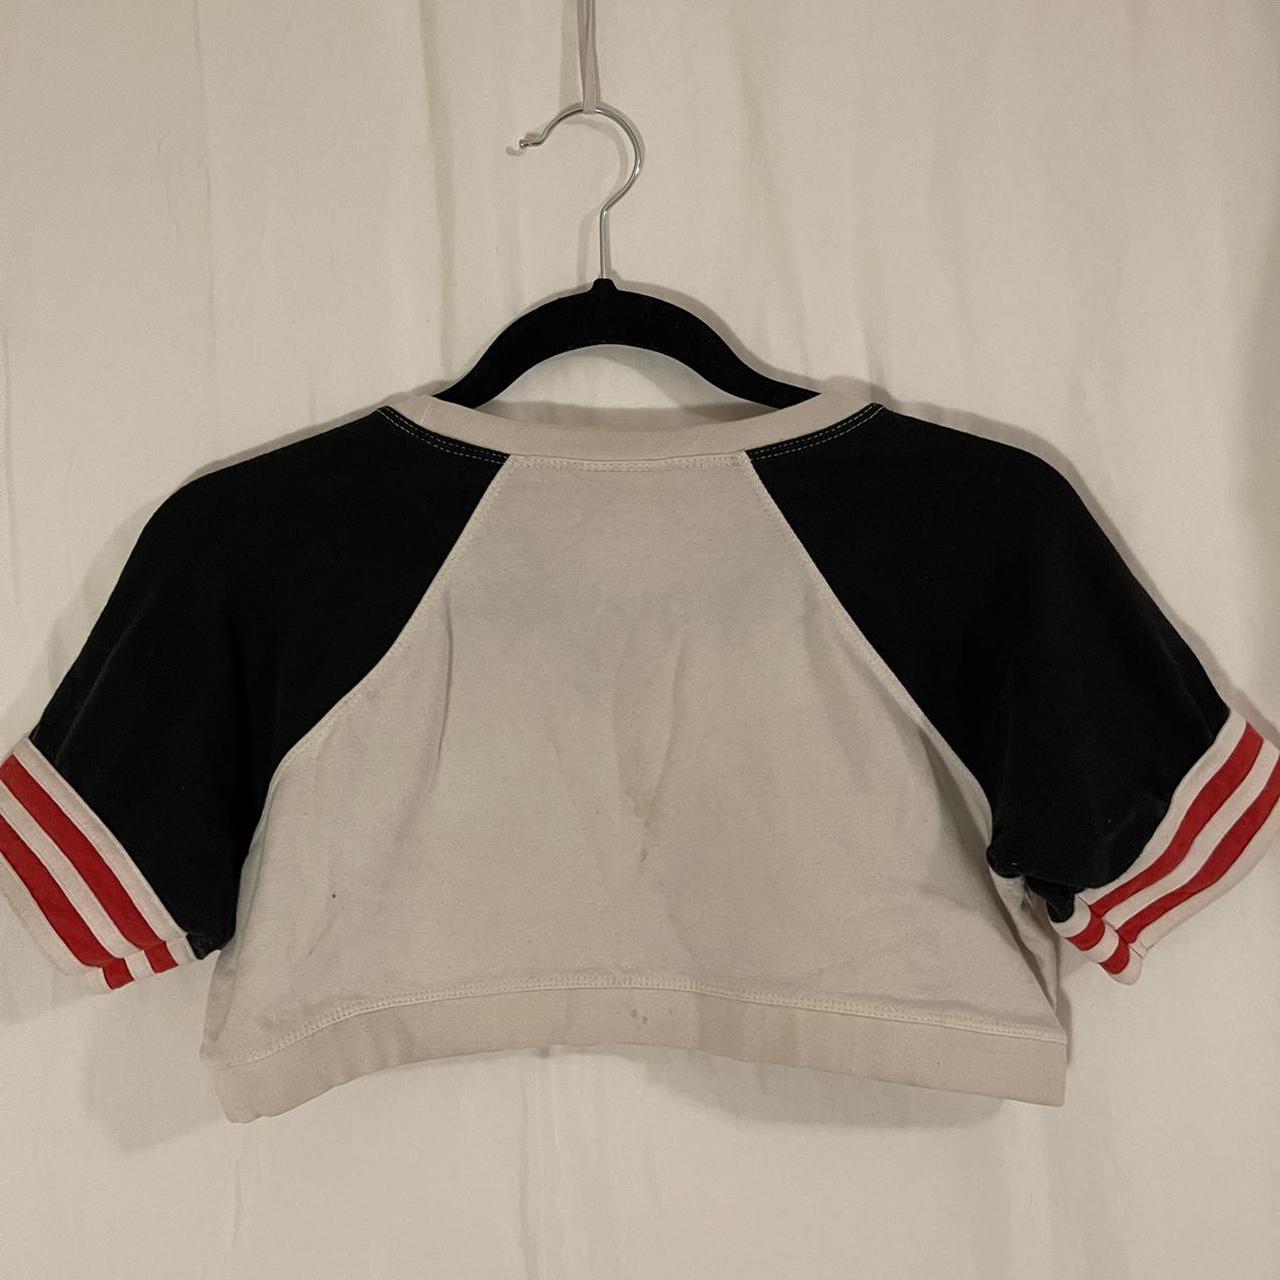 Vintage Adidas crop top with the three stripes on... - Depop